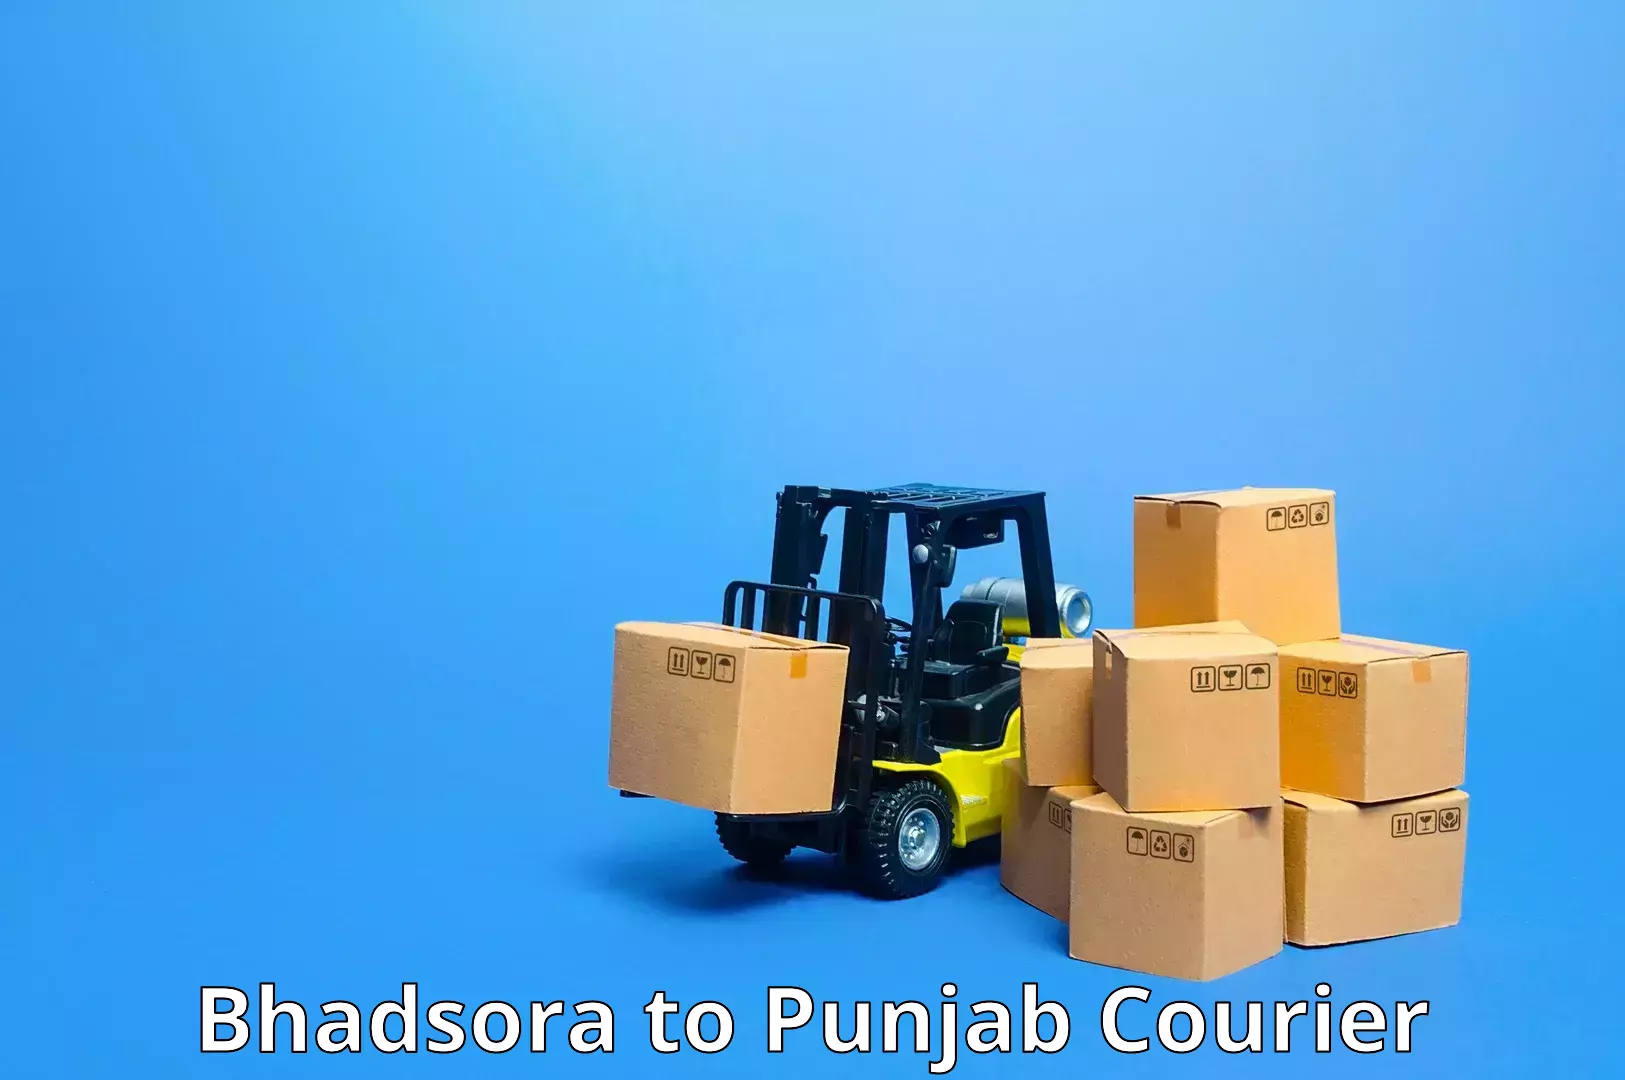 Optimized shipping routes in Bhadsora to Malout